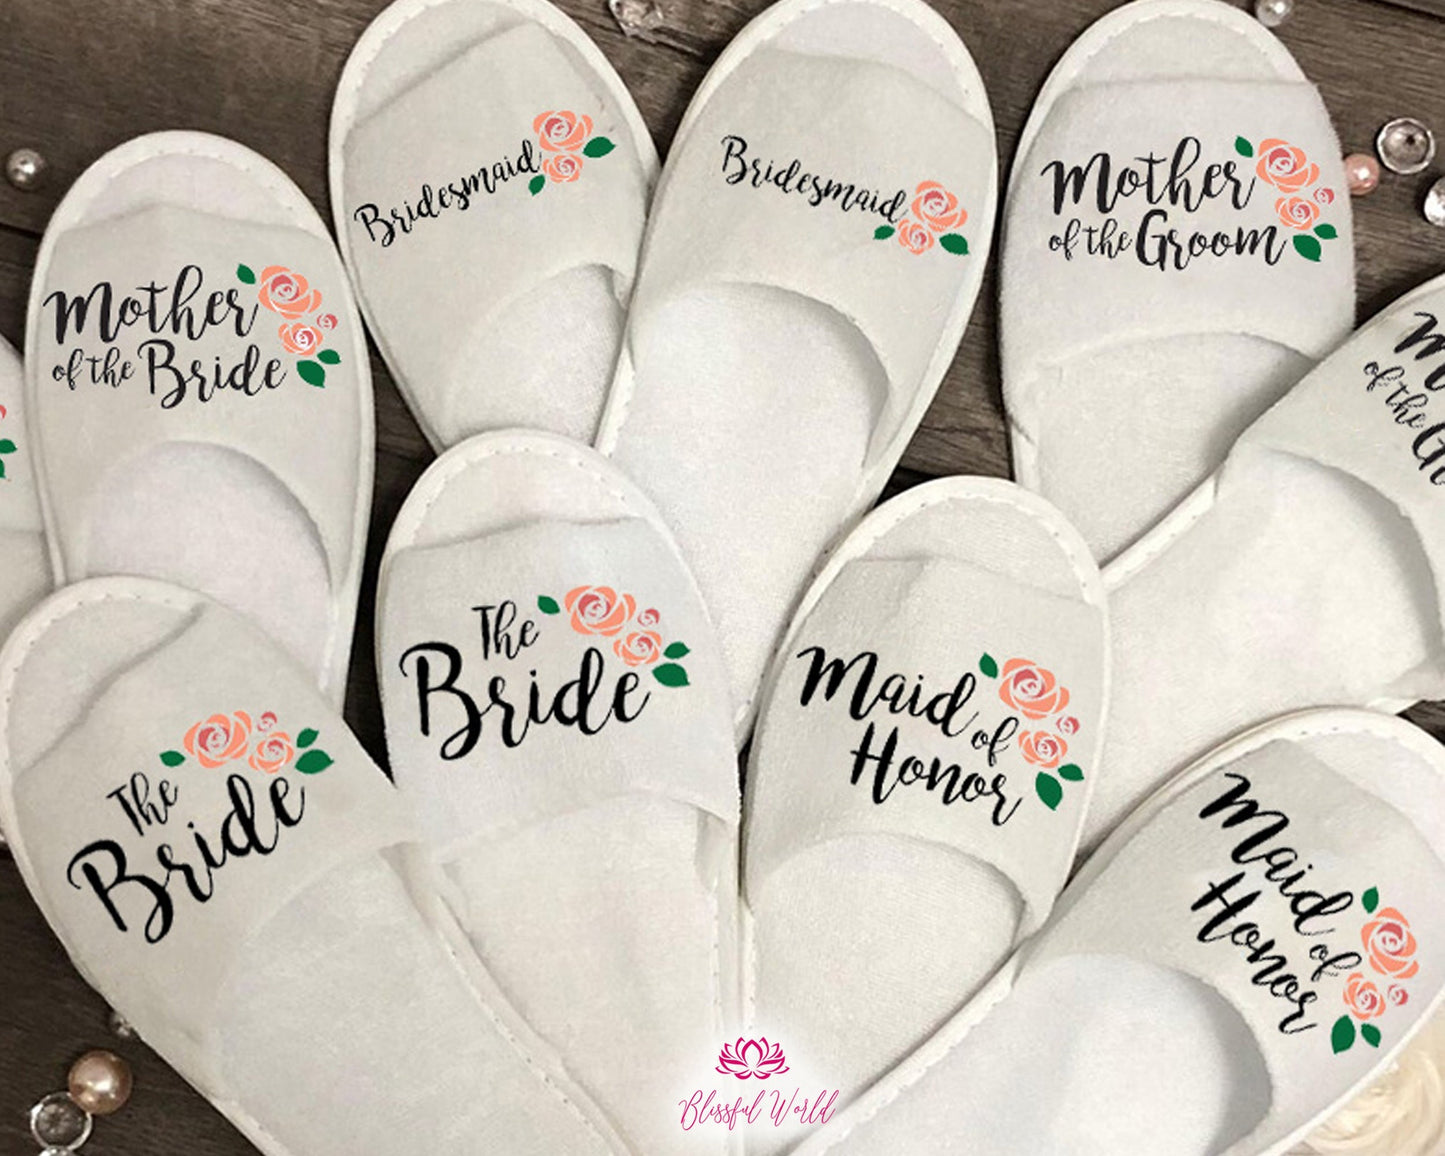 Bride slippers, Bridesmaid gifts, bridesmaid slippers, maid of honor gift, bride gift, wedding gift, bachelorette gifts